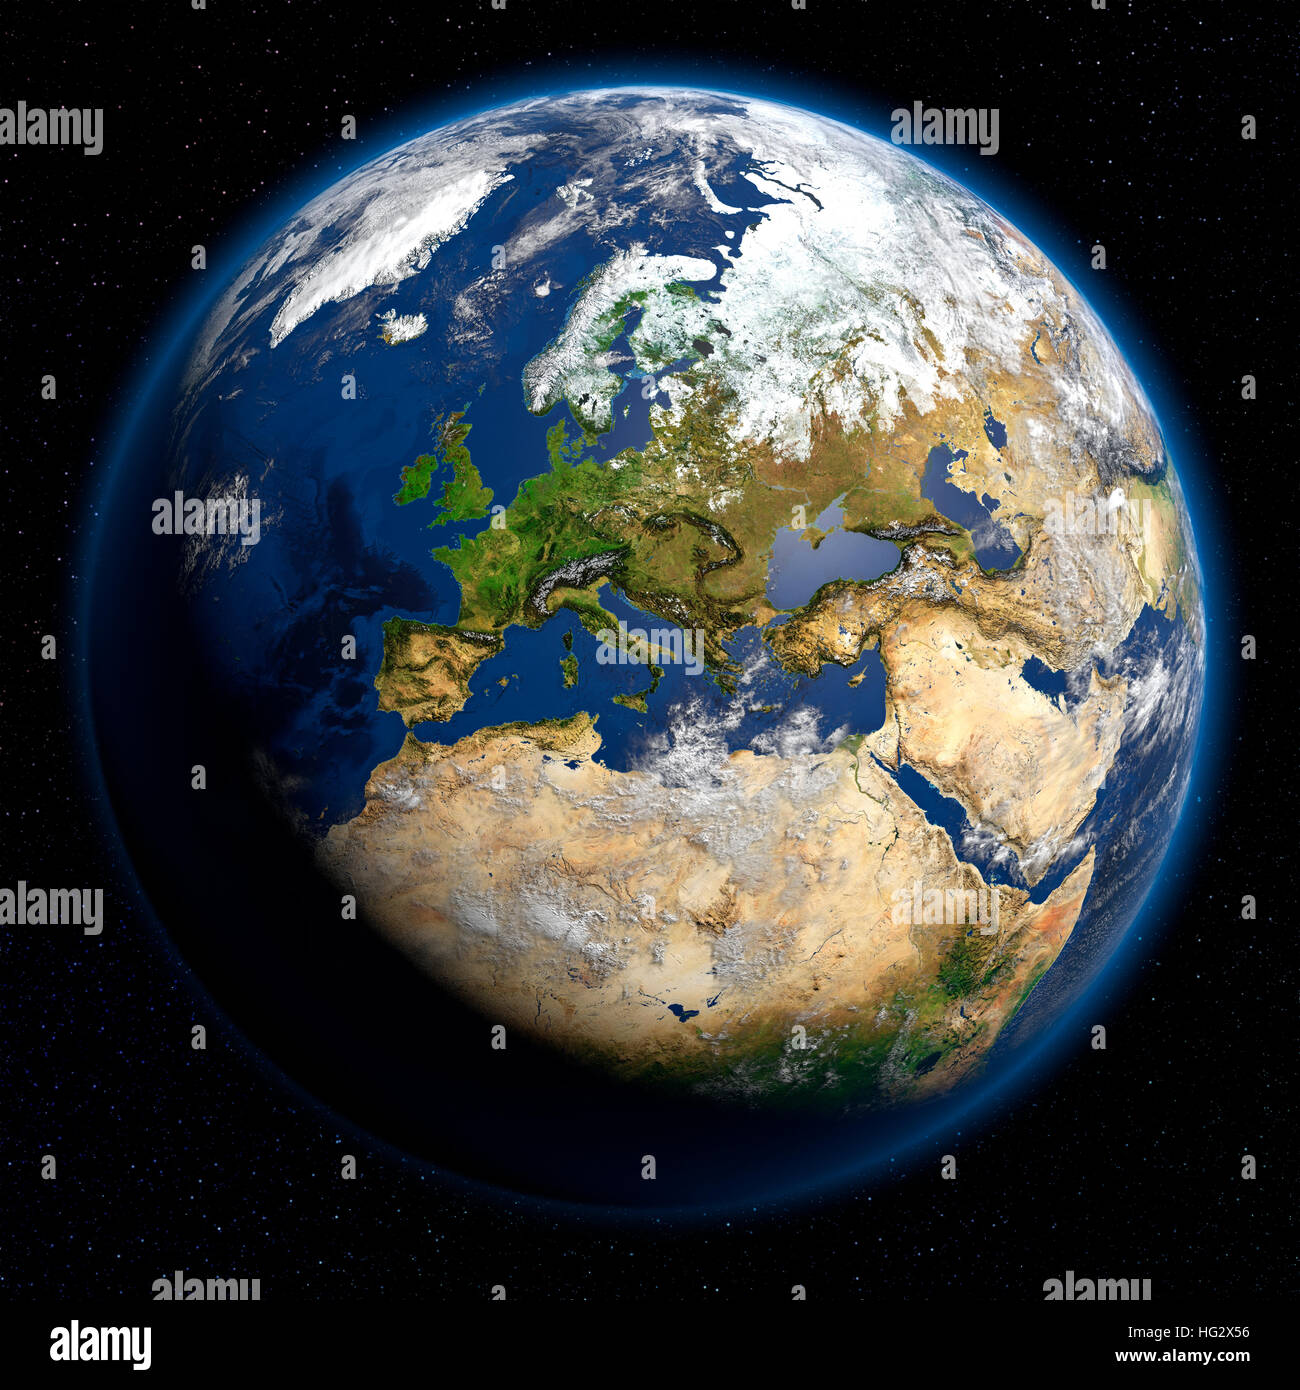 Earth viewed from space showing Europe. Realistic digital illustration including relief map hill shading of terrain. Please credit Nasa. Stock Photo